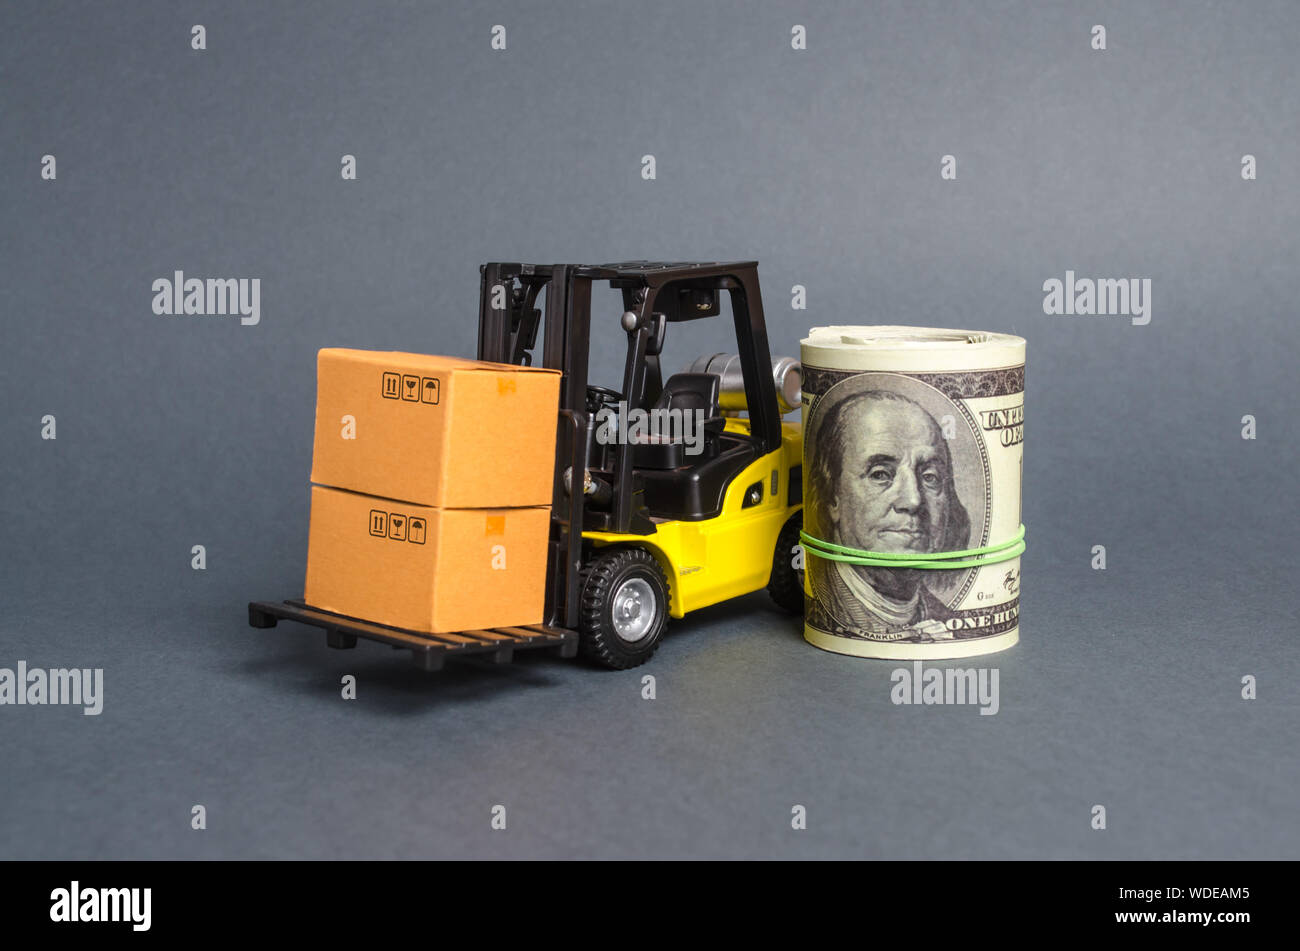 A forklift truck carries cardboard boxes and dollar roll. Transport company. Performance efficient. Trade and production of products and goods, balanc Stock Photo